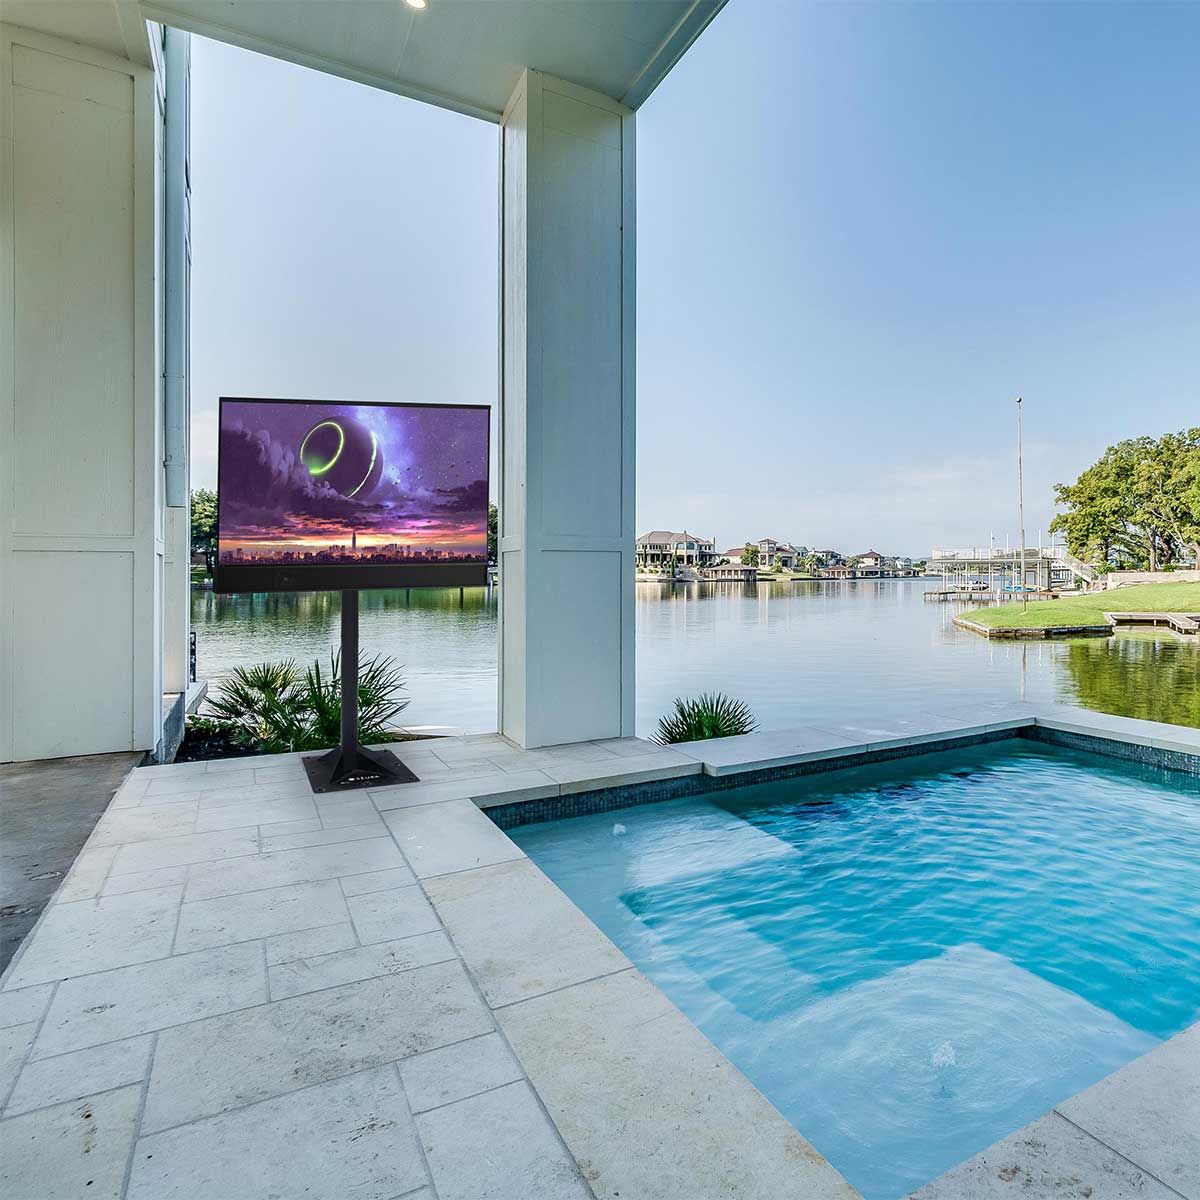 Séura Shade Series 2 4K UHD Outdoor TV, stand-mounted beside a pool